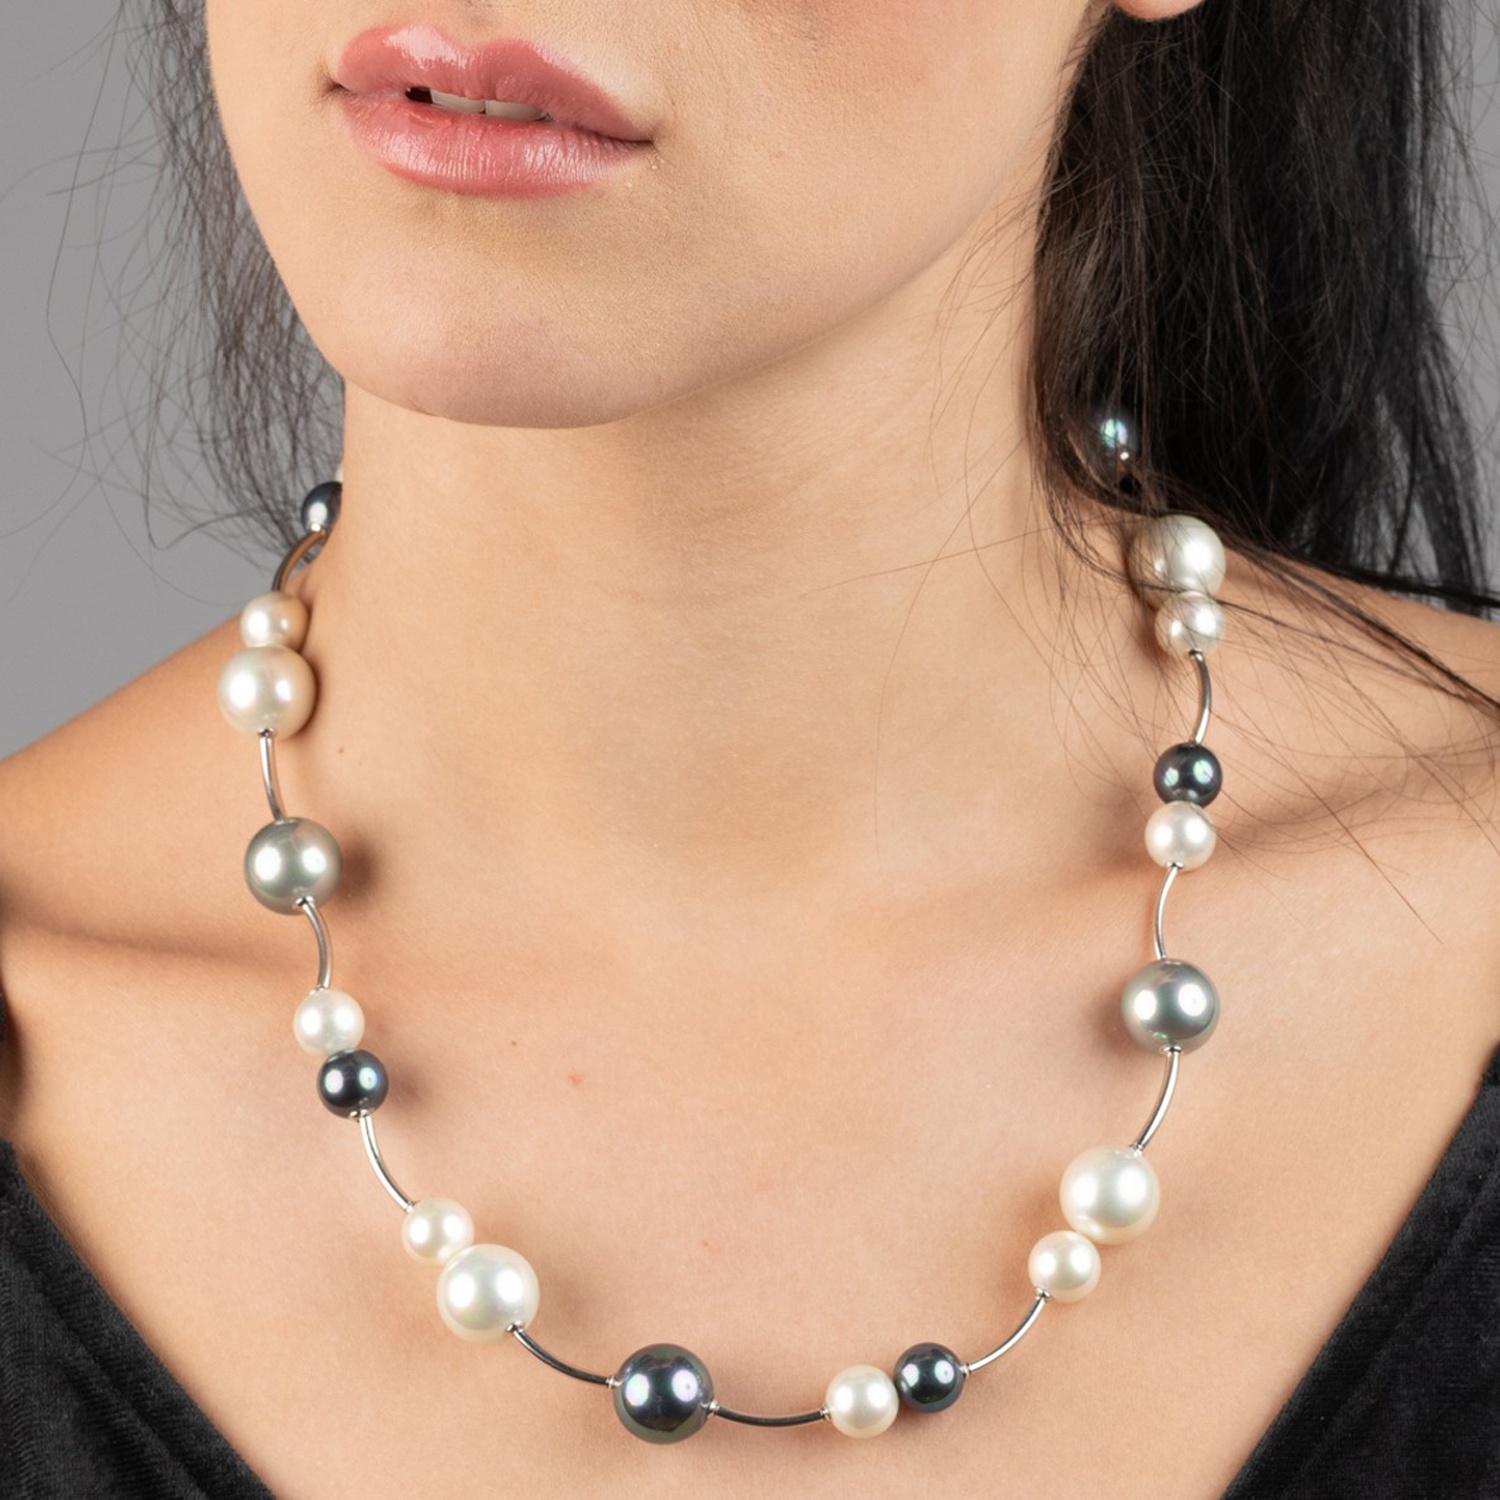 Necklace in Black, White and Grey Pearls 3